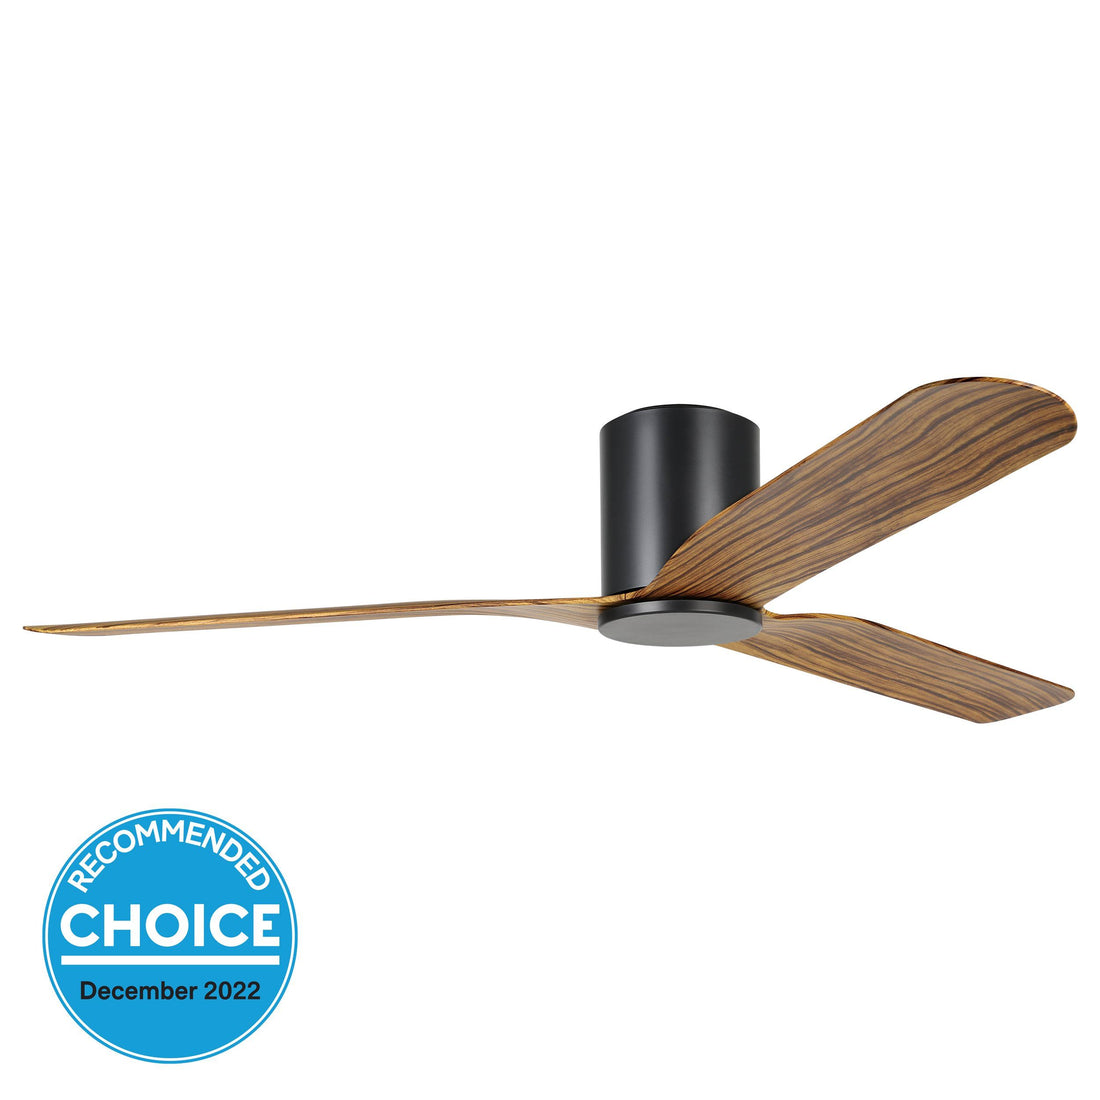 Iluka 60&quot;/1520mm Black and Rustic Timber DC Low Profile Flush Ceiling Fan